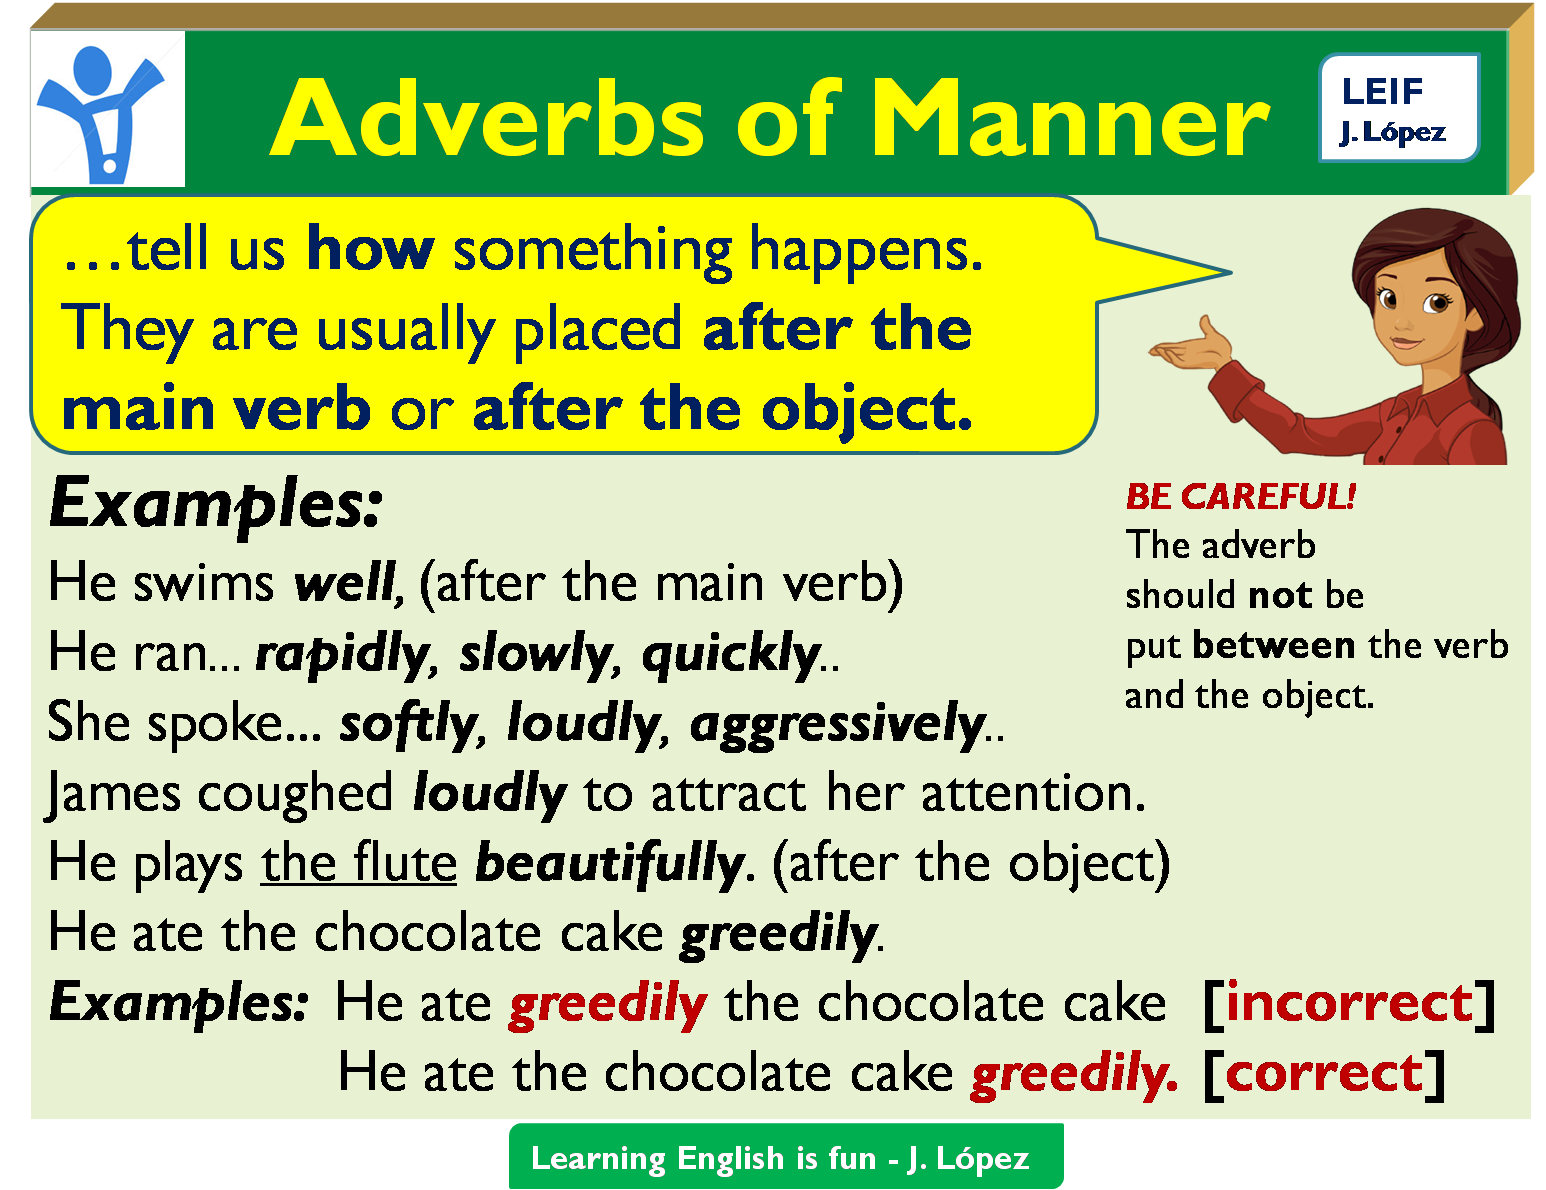 adverbs-of-manner-how-to-use-top-english-grammar-zohal